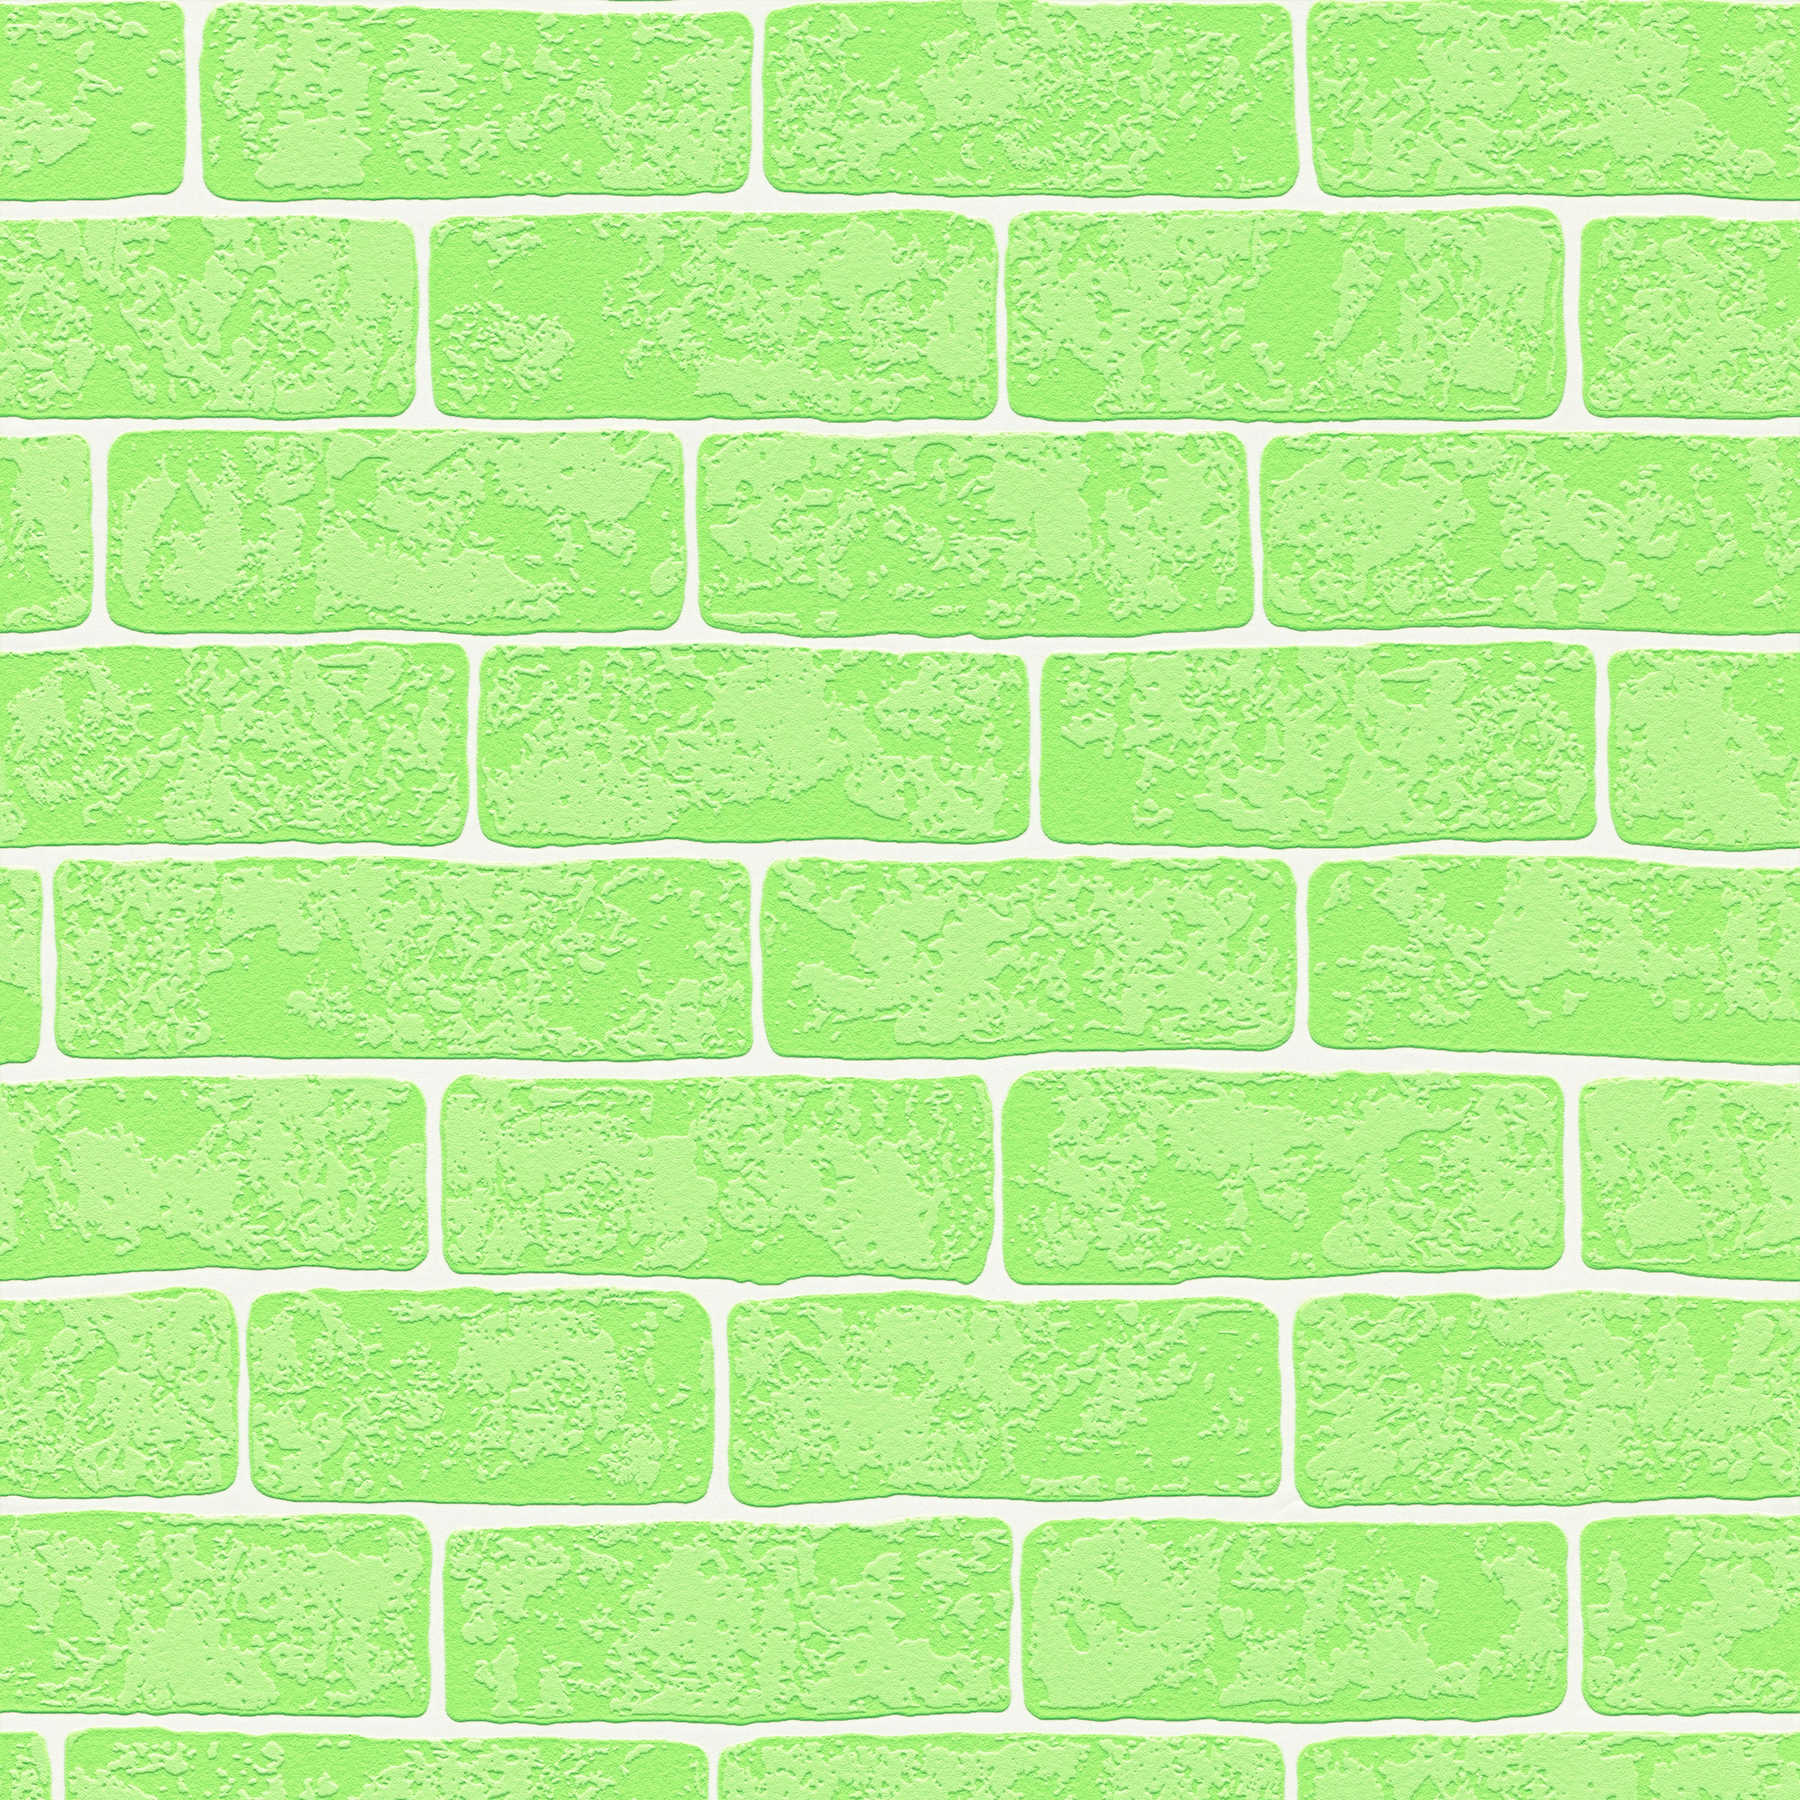 Non-woven wallpaper stone wall with 3D texture - green, white
